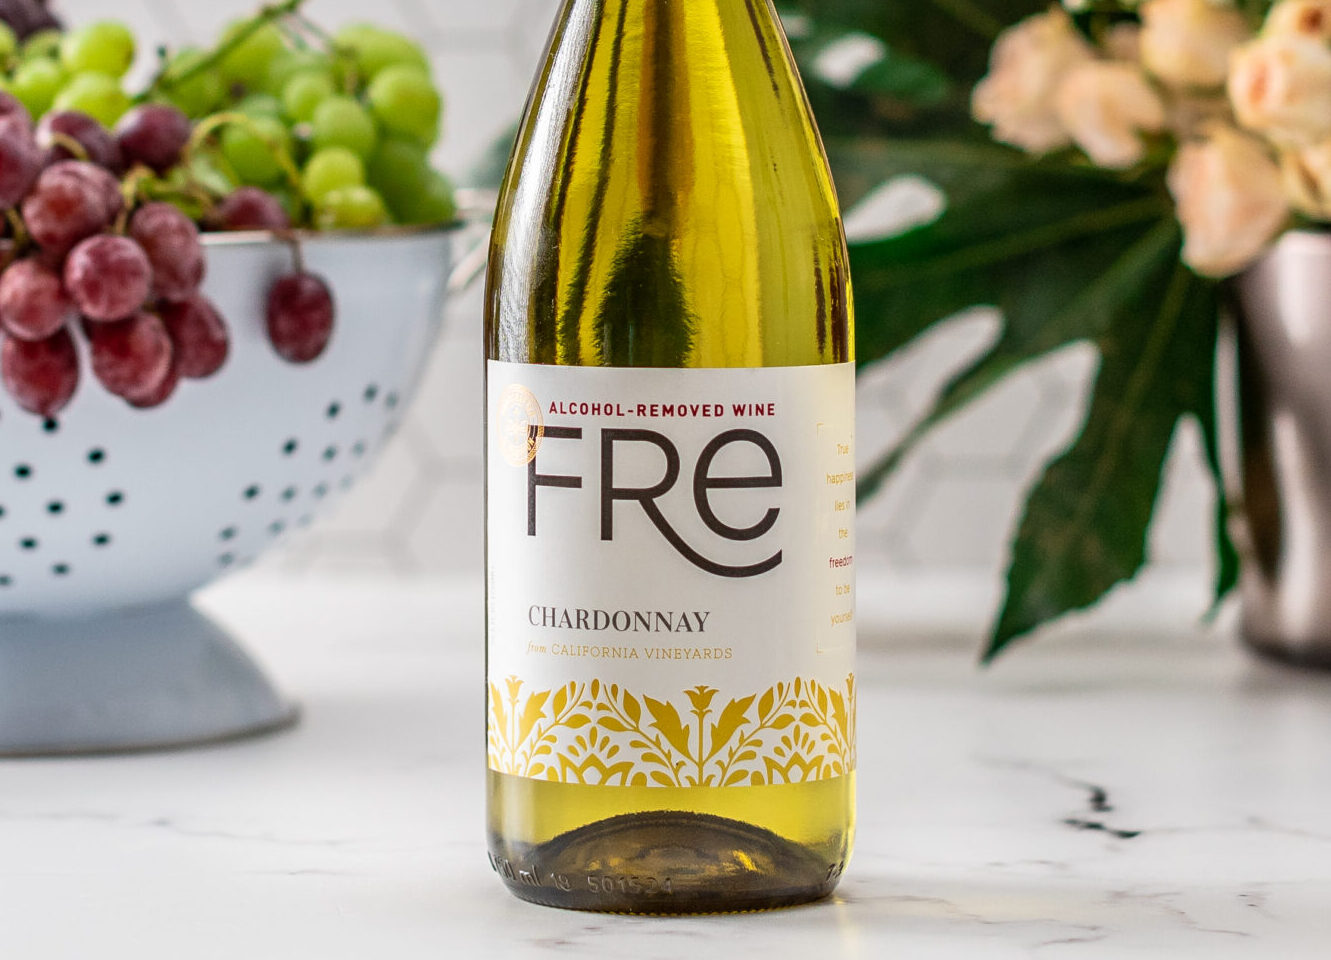 fre wines, alcohol removed chardonnay, alcohol-removed wines, alcohol-removed chardonnay, alcohol free wine, alcohol free chardonnay